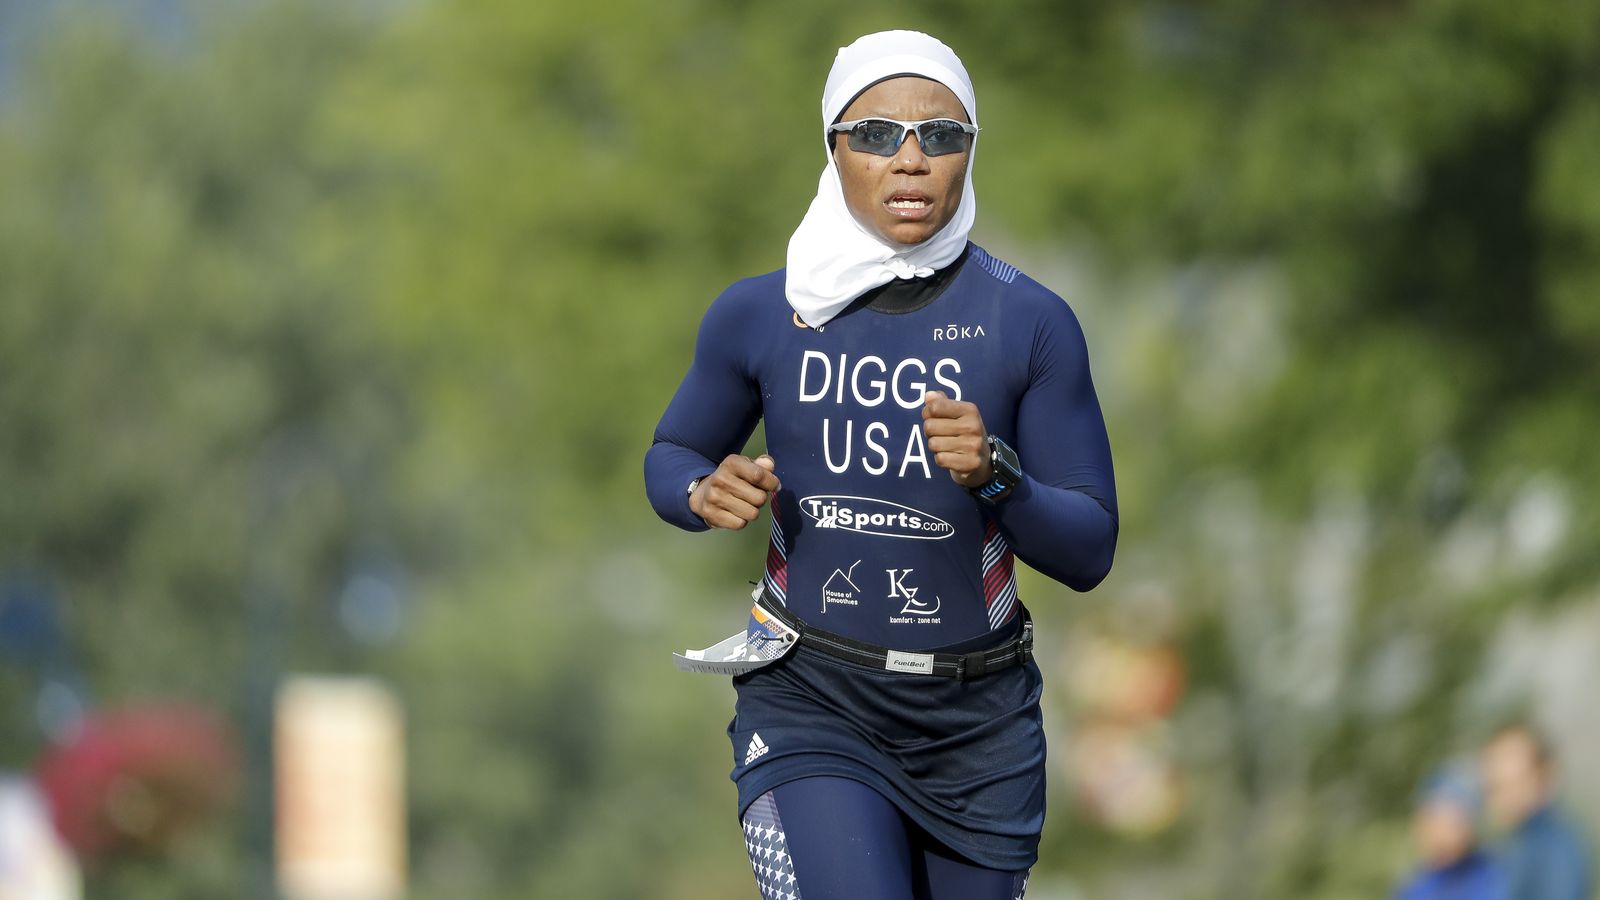 Signing a Waiver to Run in Hijab Isn't the Solution. It’s the Problem.